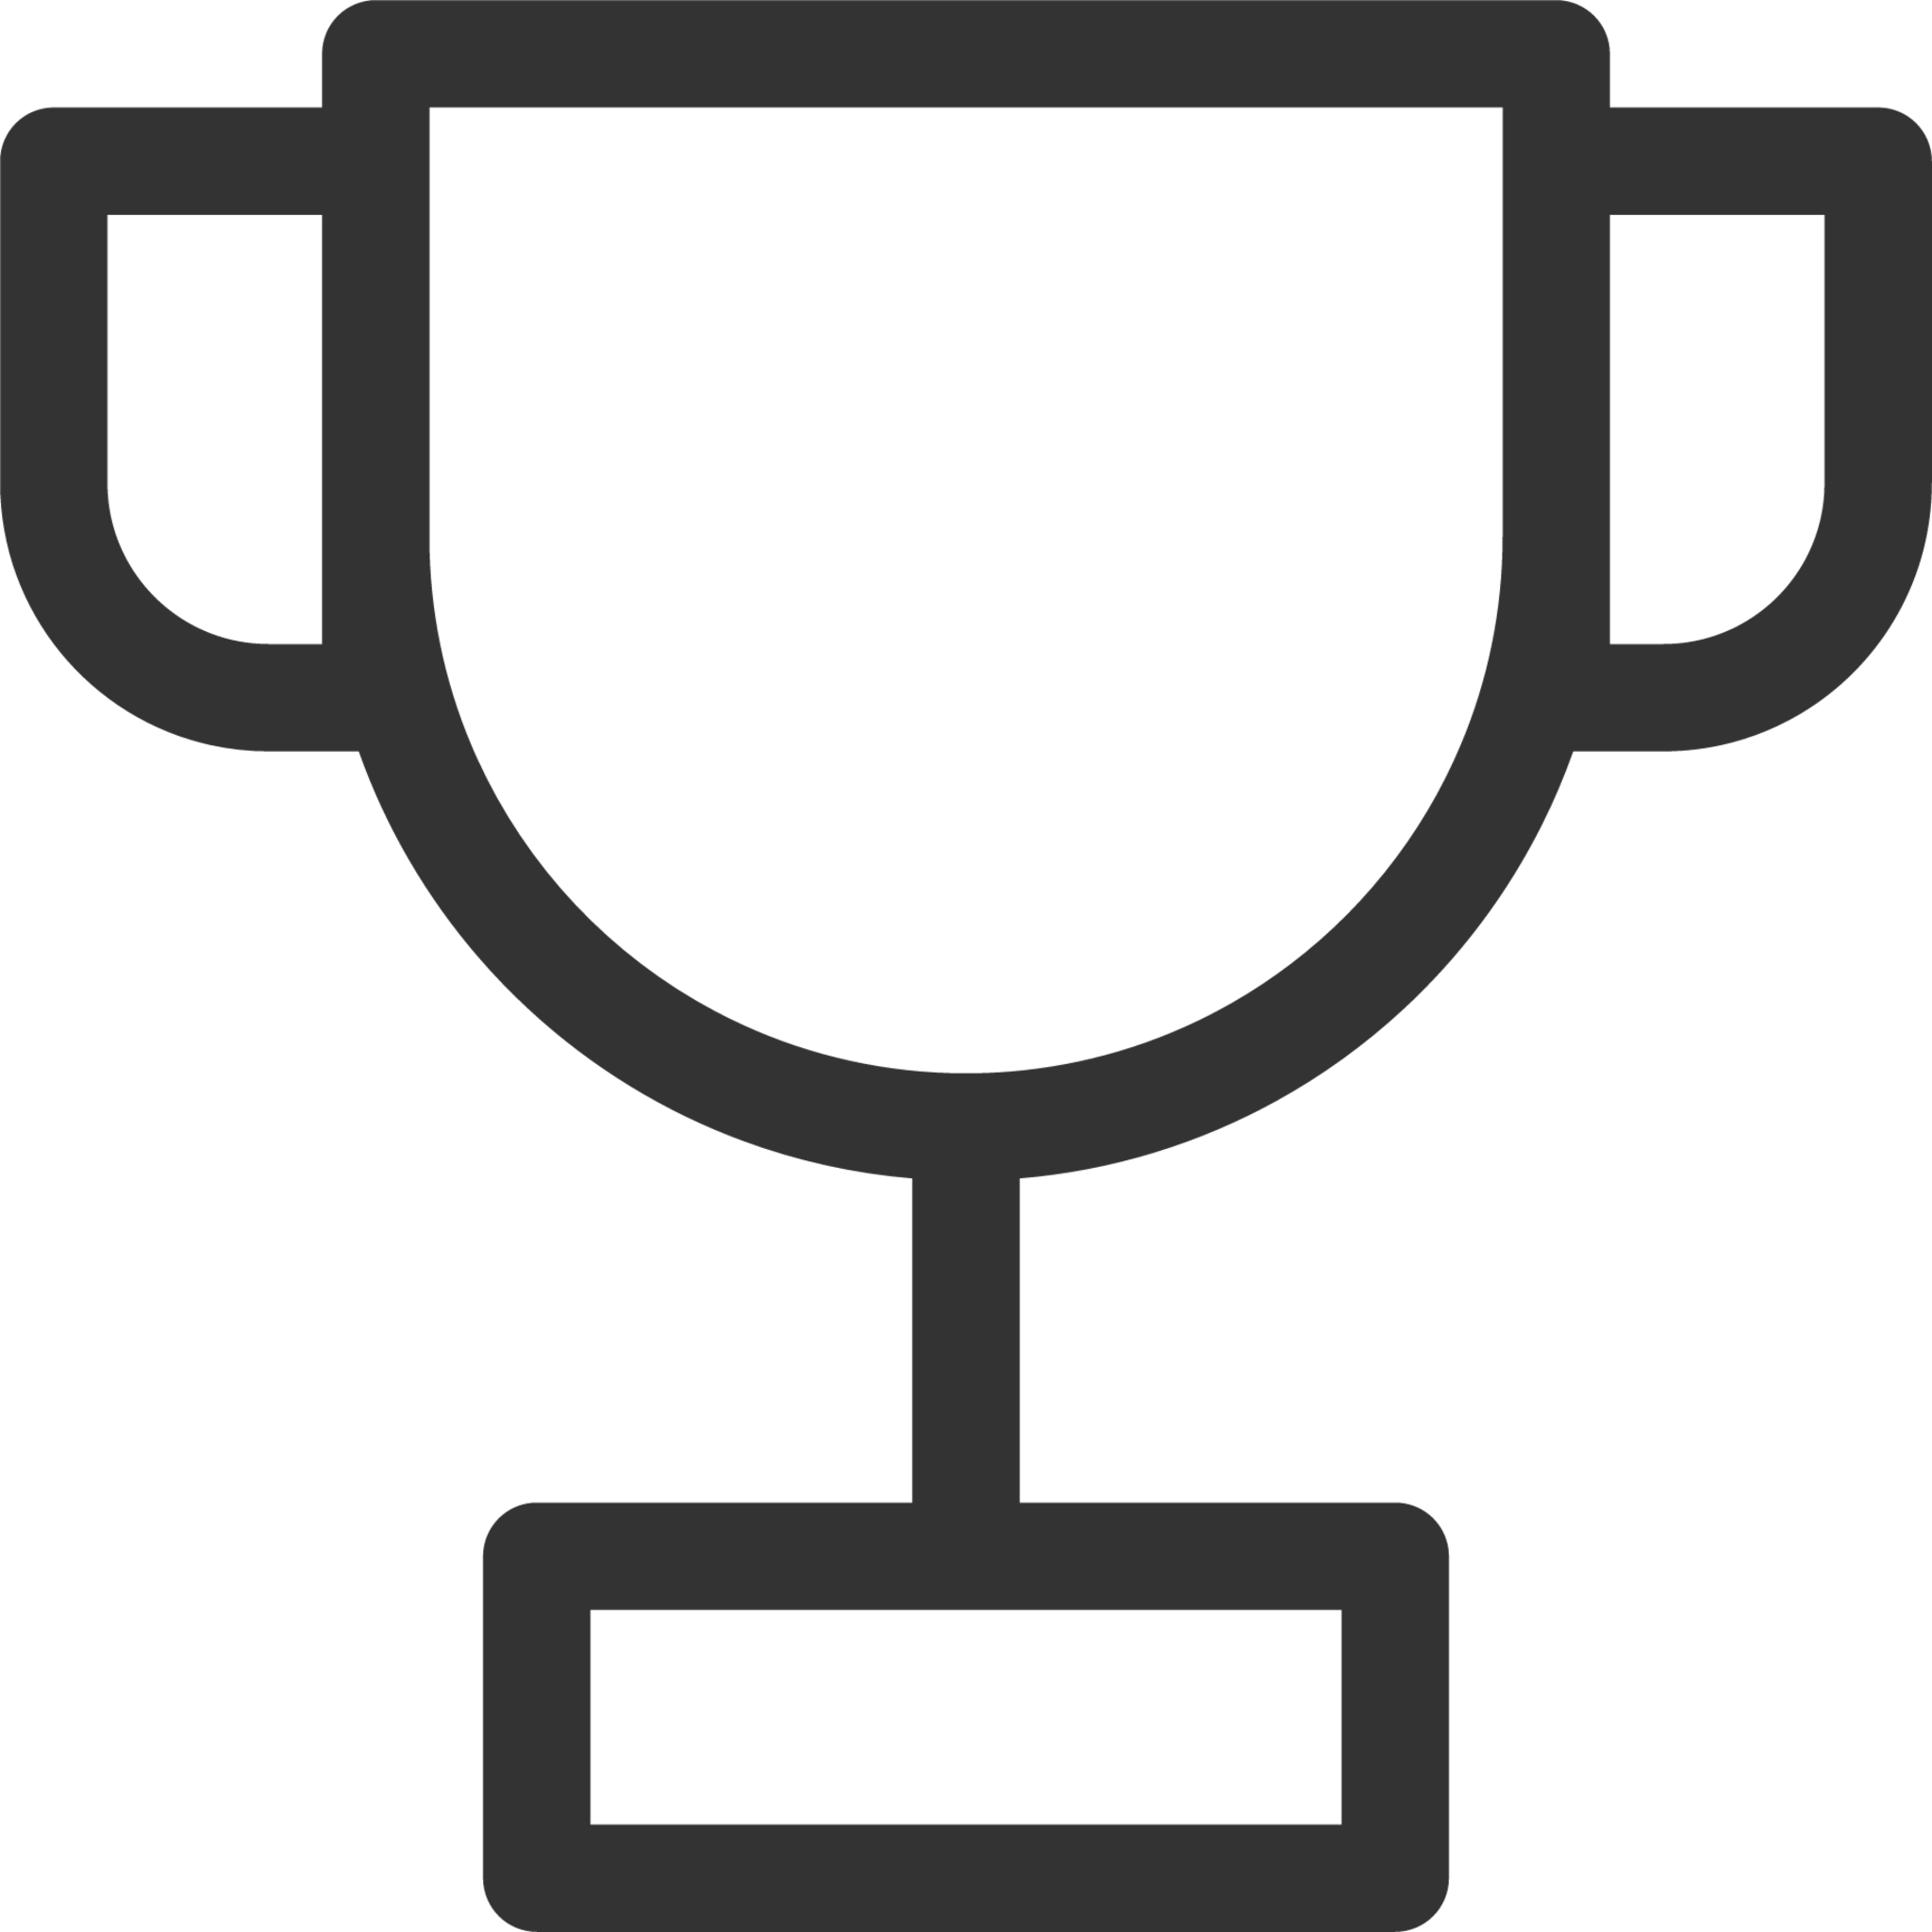 trophy icon png